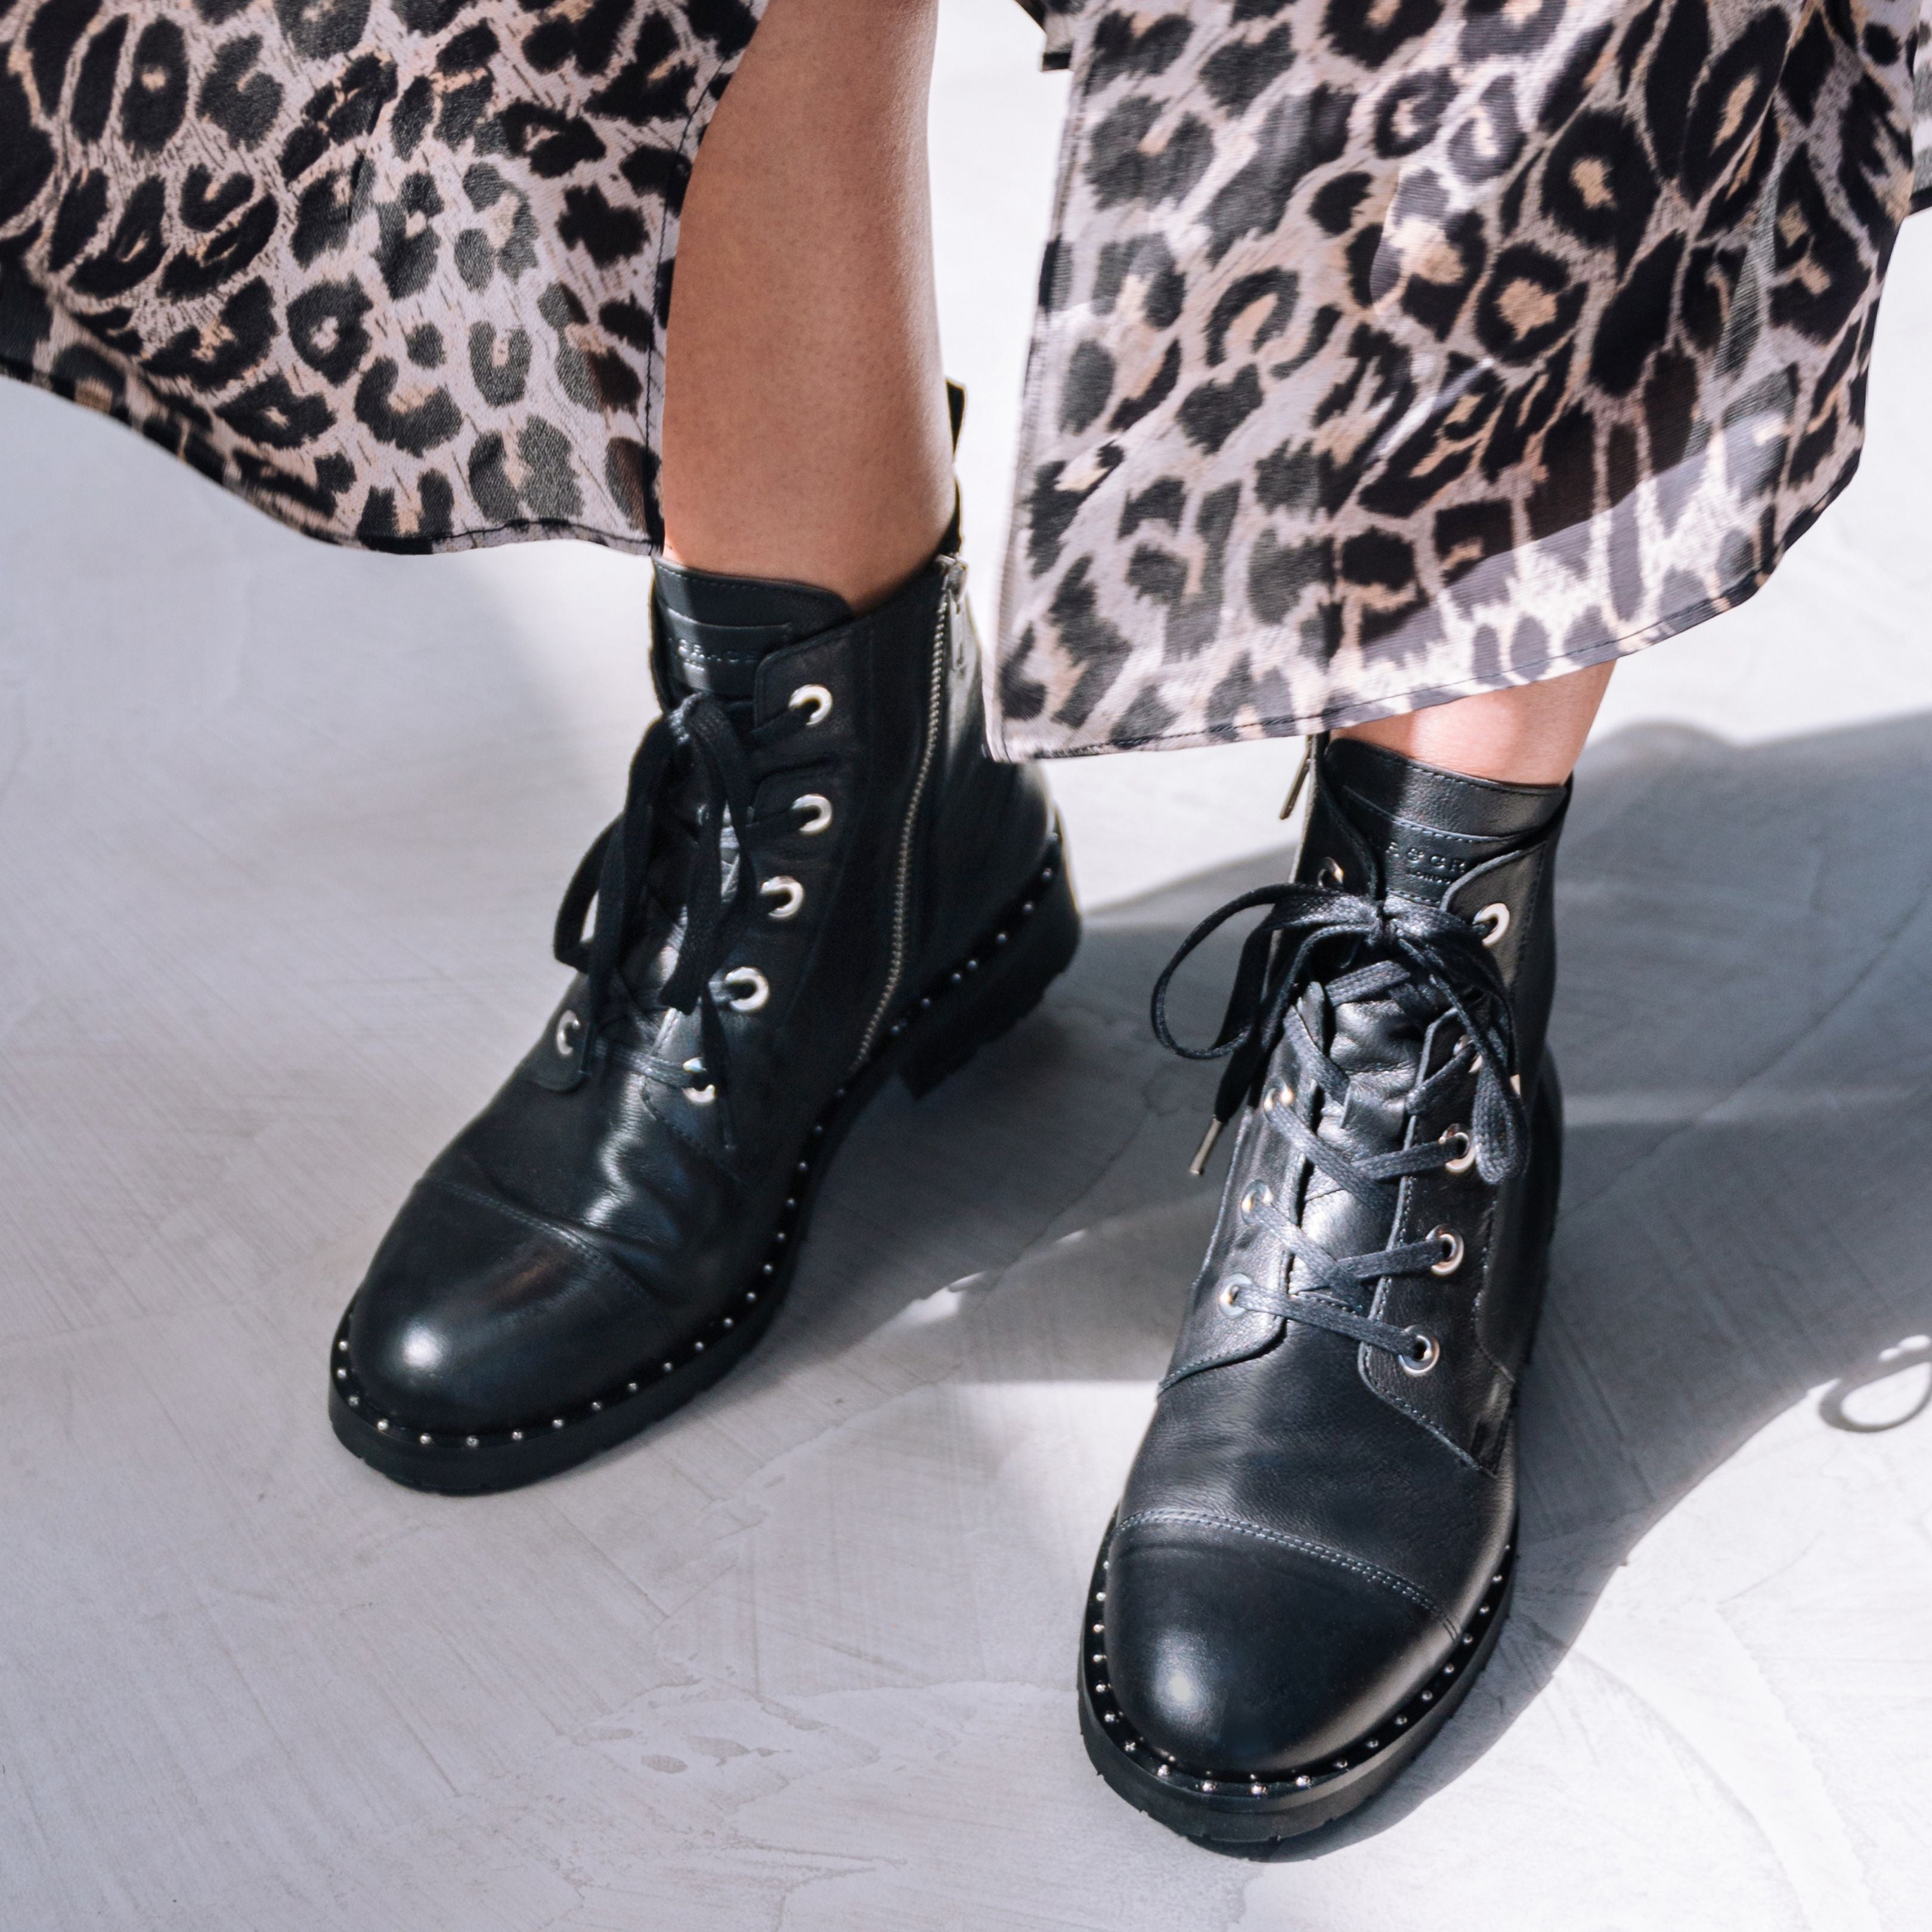 How to style: Jessa Black Leather Boots